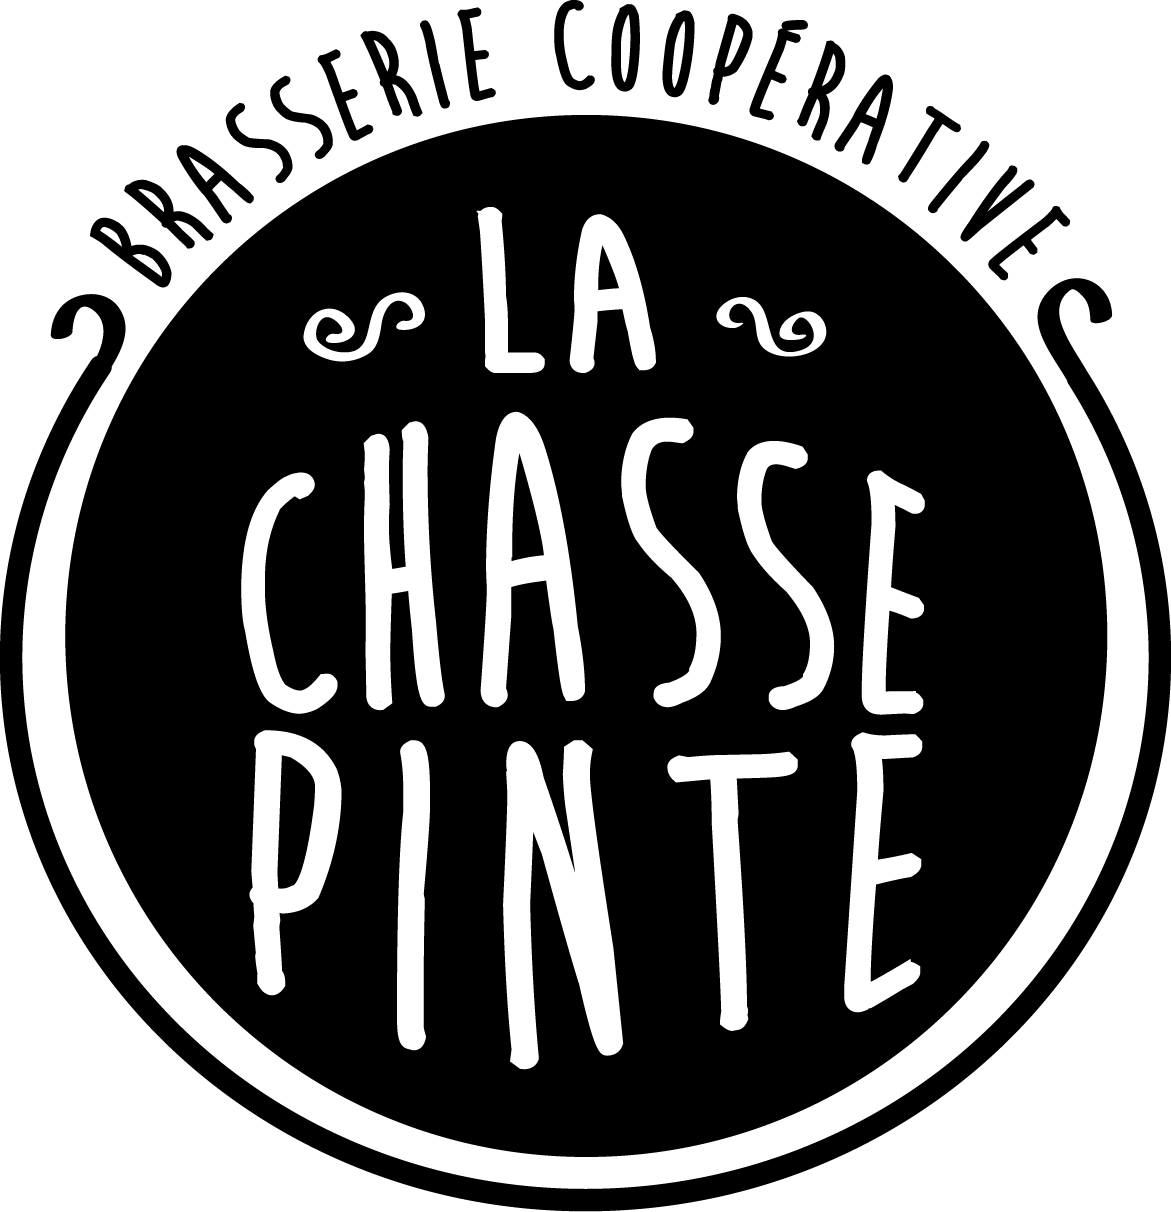 Chasse-pinte